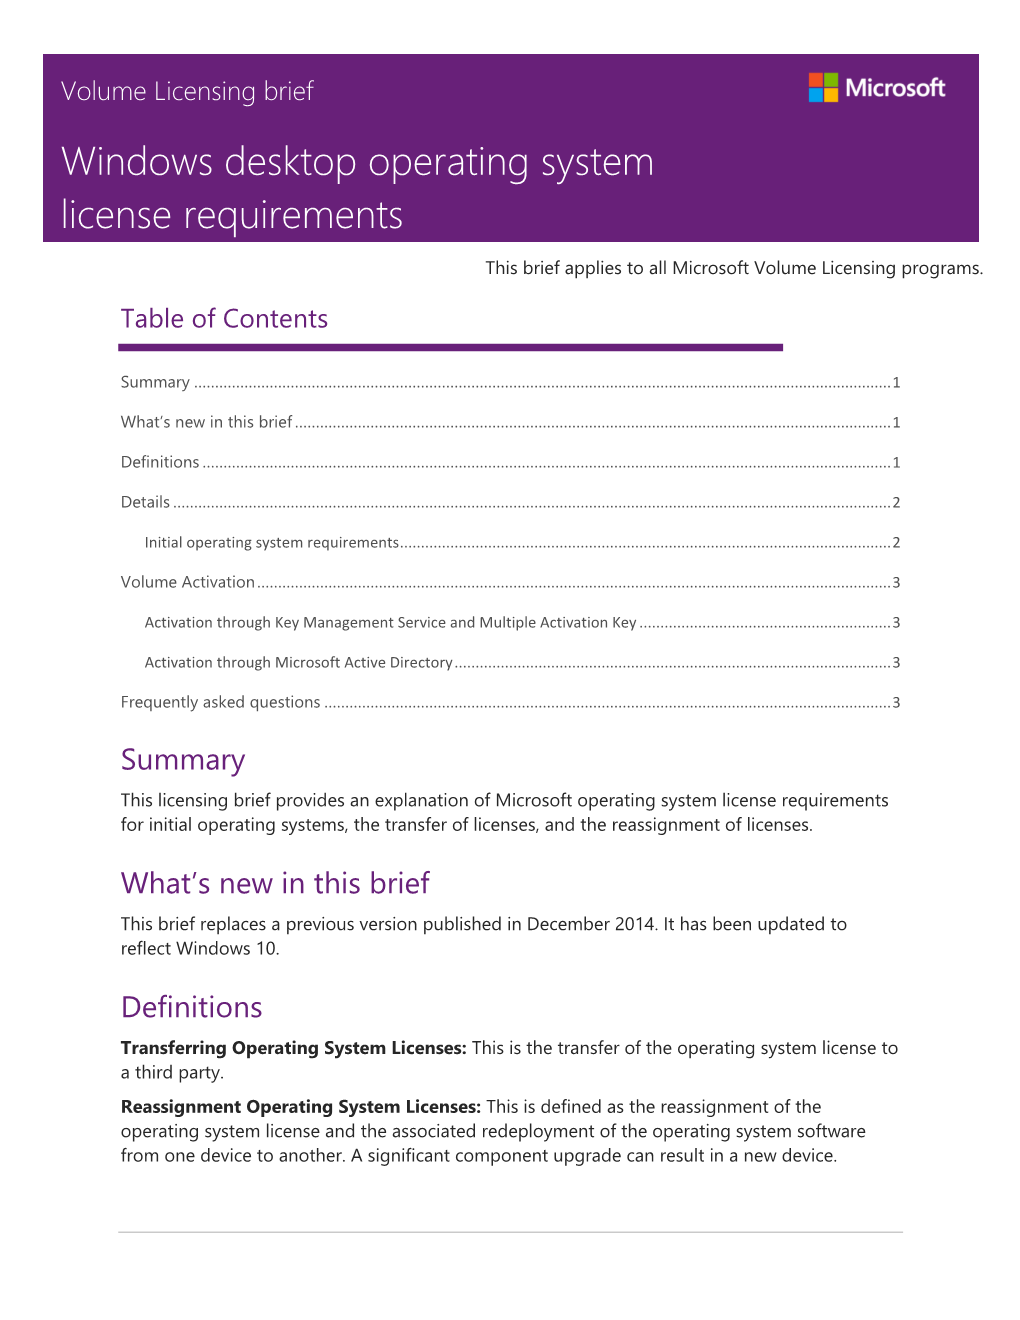 Windows Desktop Operating System License Requirements This Brief Applies to All Microsoft Volume Licensing Programs